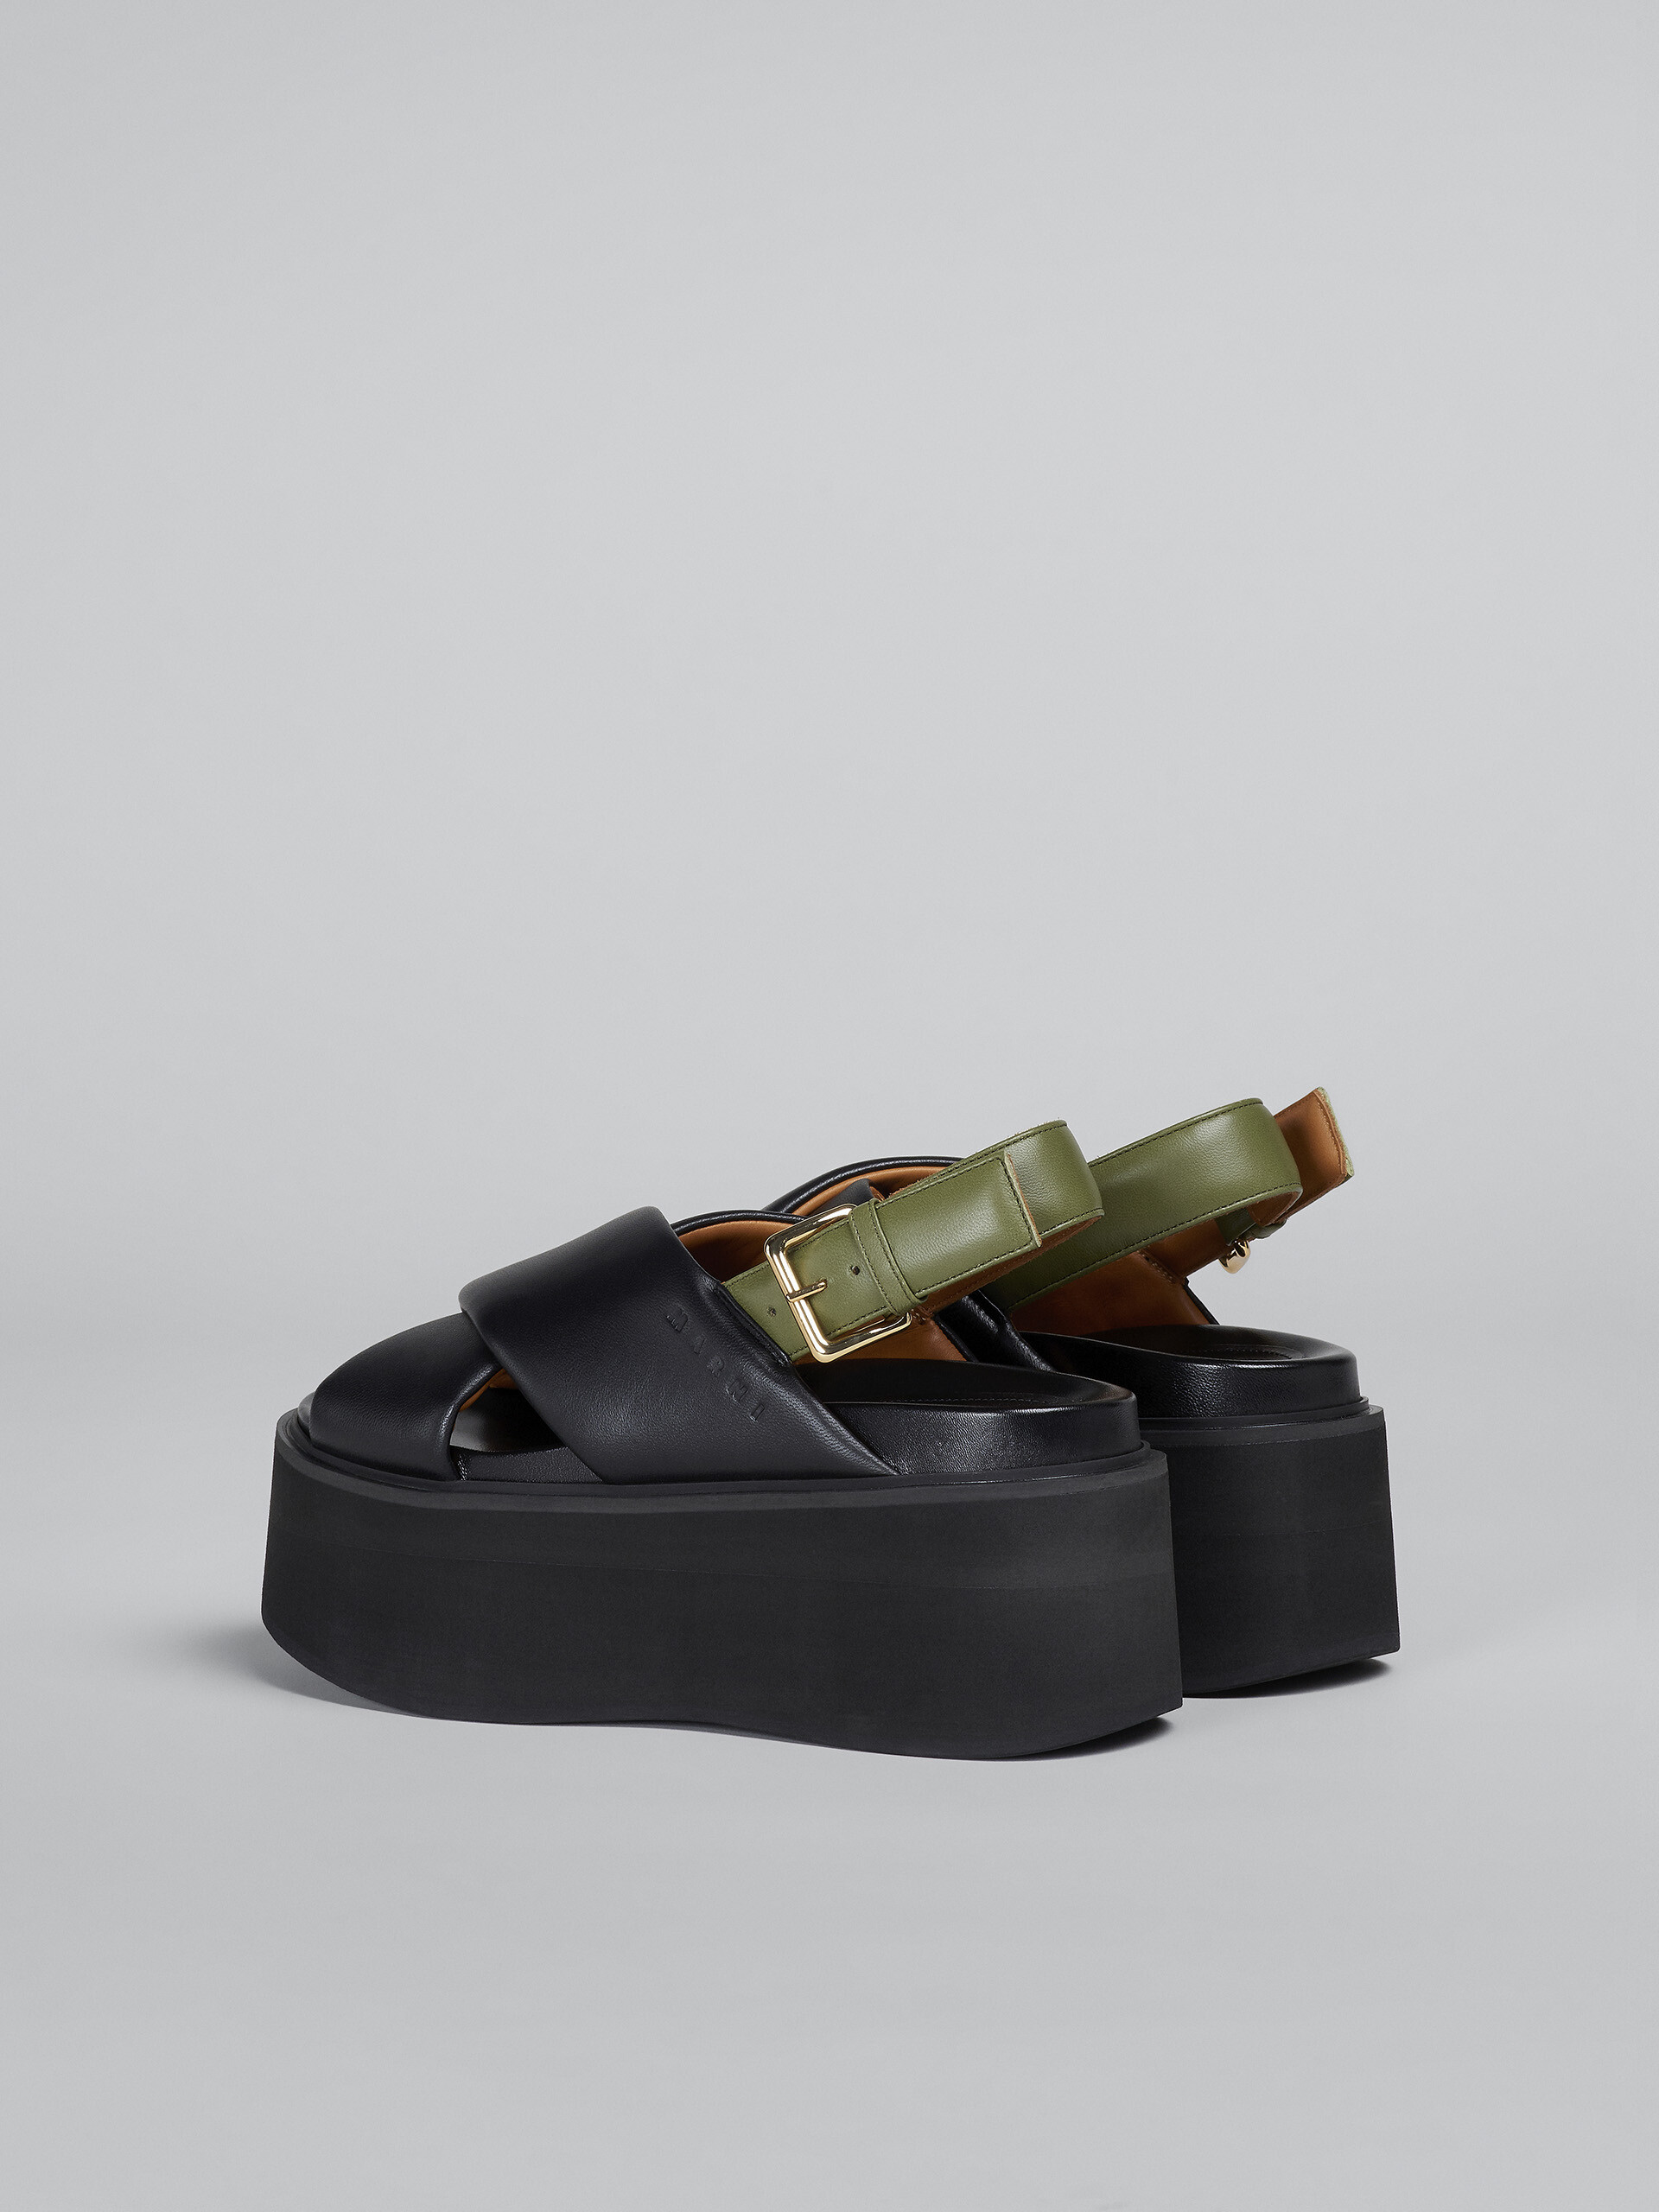 Black and green leather wedge - Sandals - Image 3